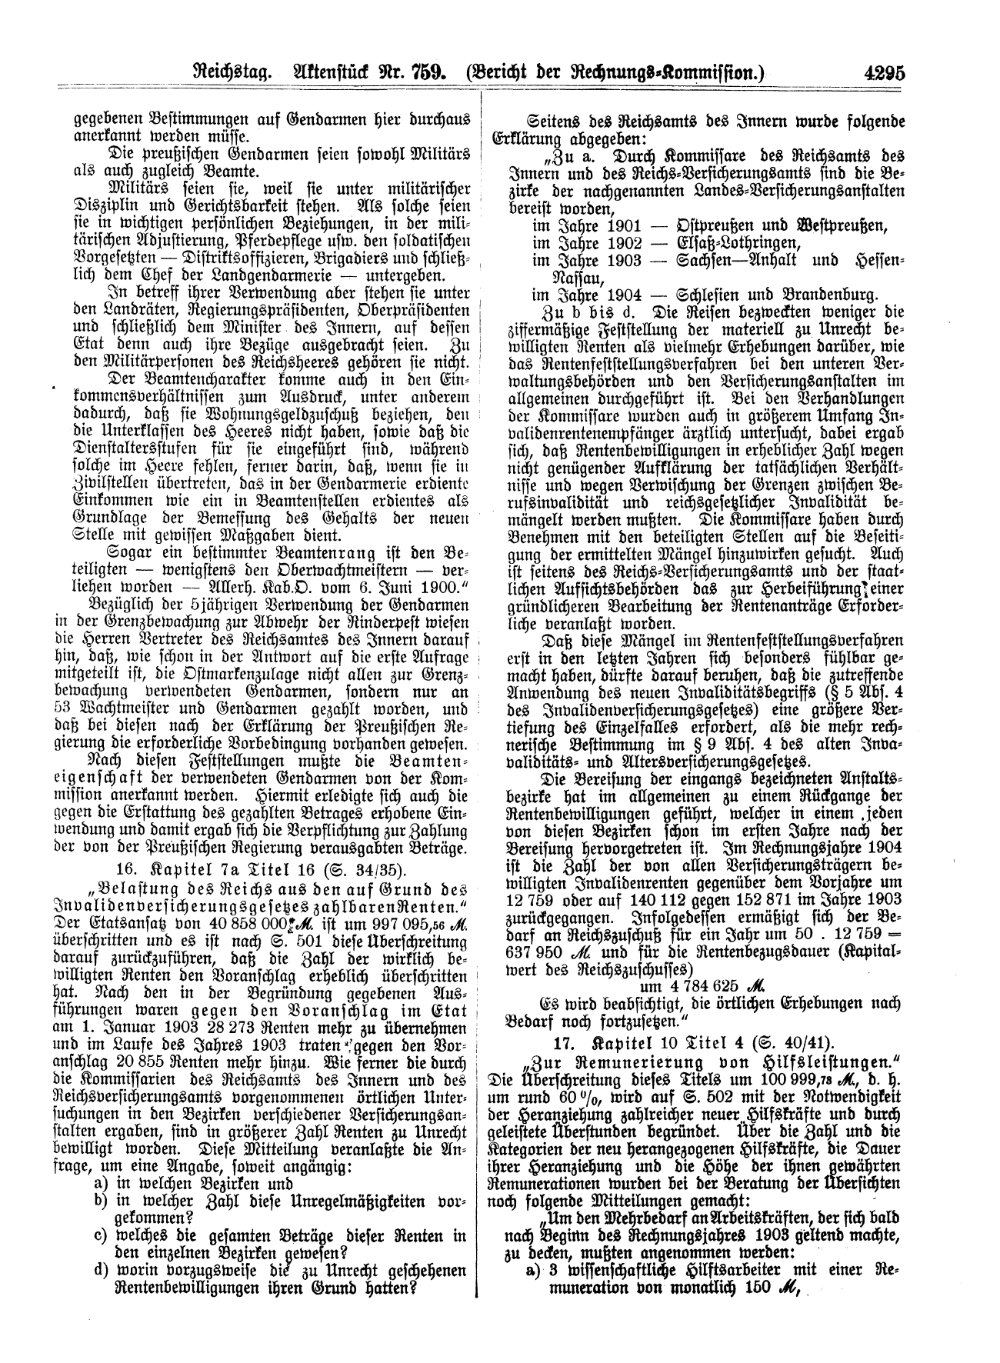 Scan of page 4295